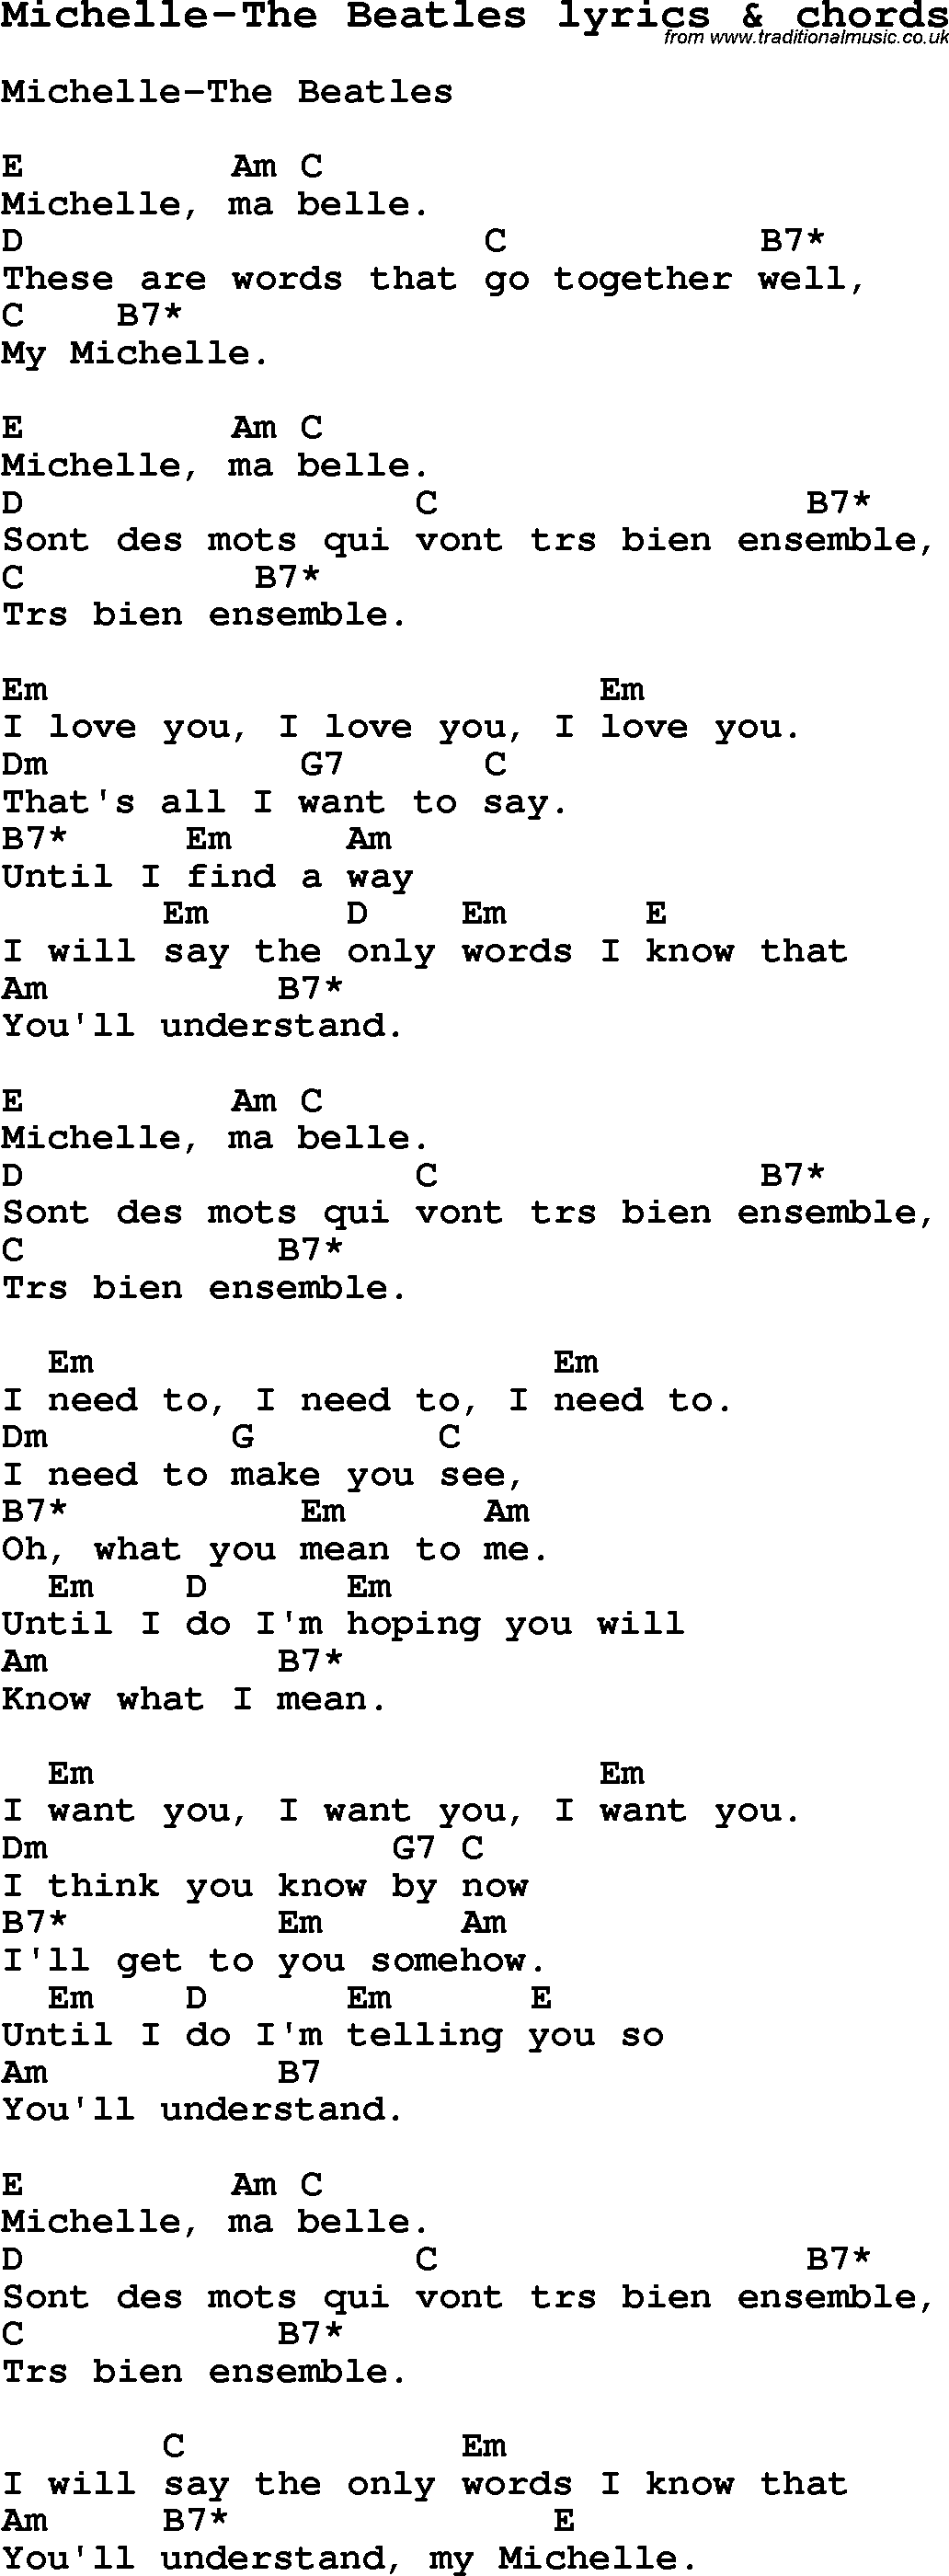 Love Song Lyrics for: Michelle-The Beatles with chords for Ukulele, Guitar Banjo etc.